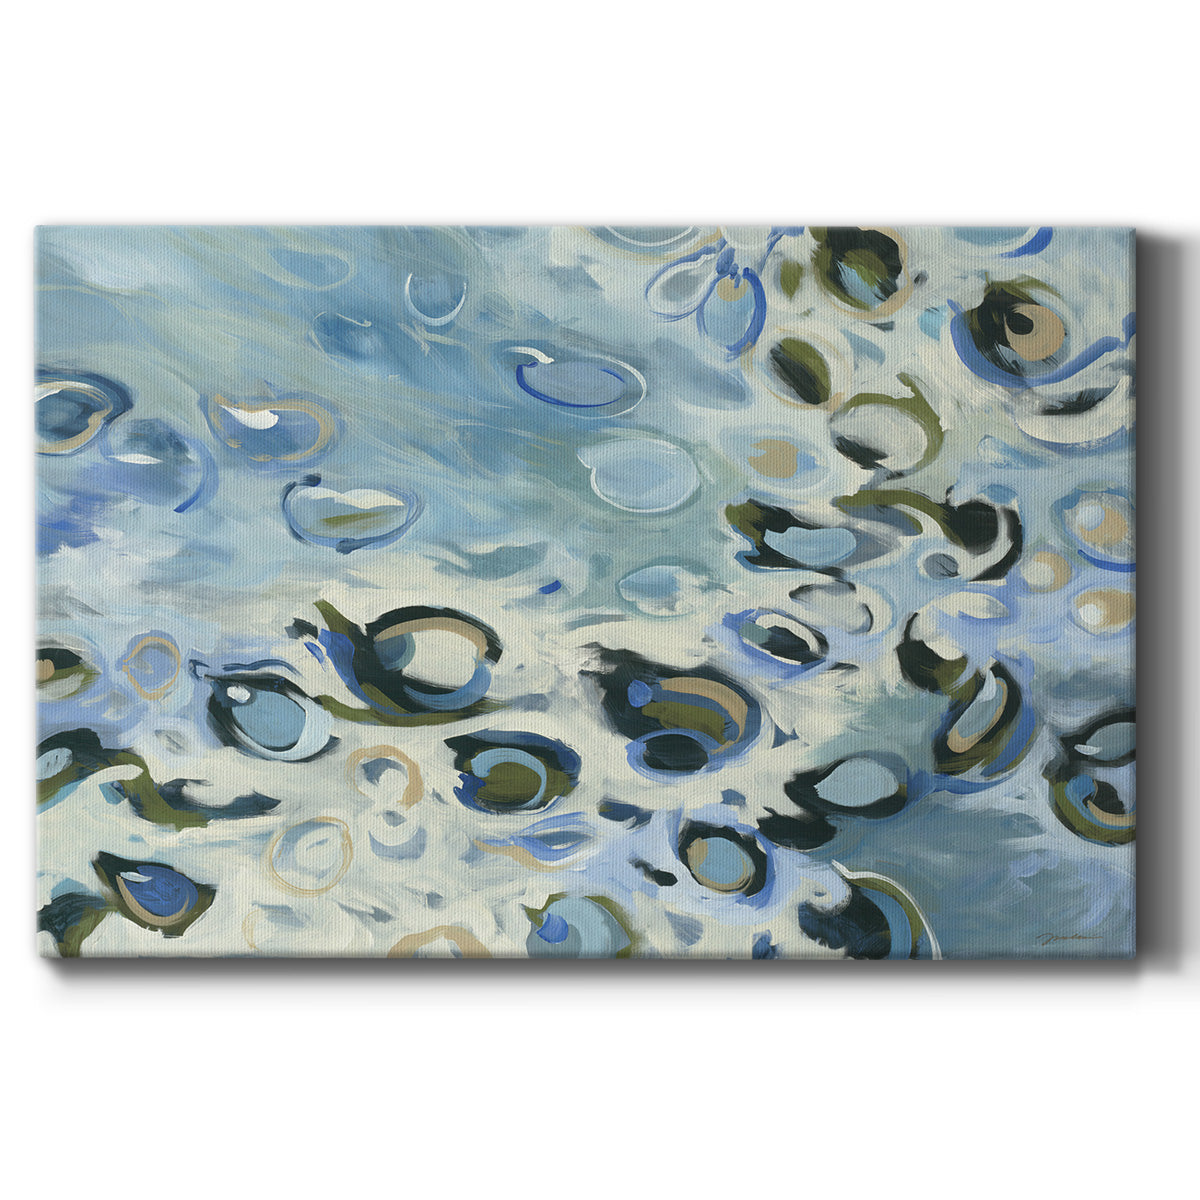 Washed Ashore Premium Gallery Wrapped Canvas - Ready to Hang